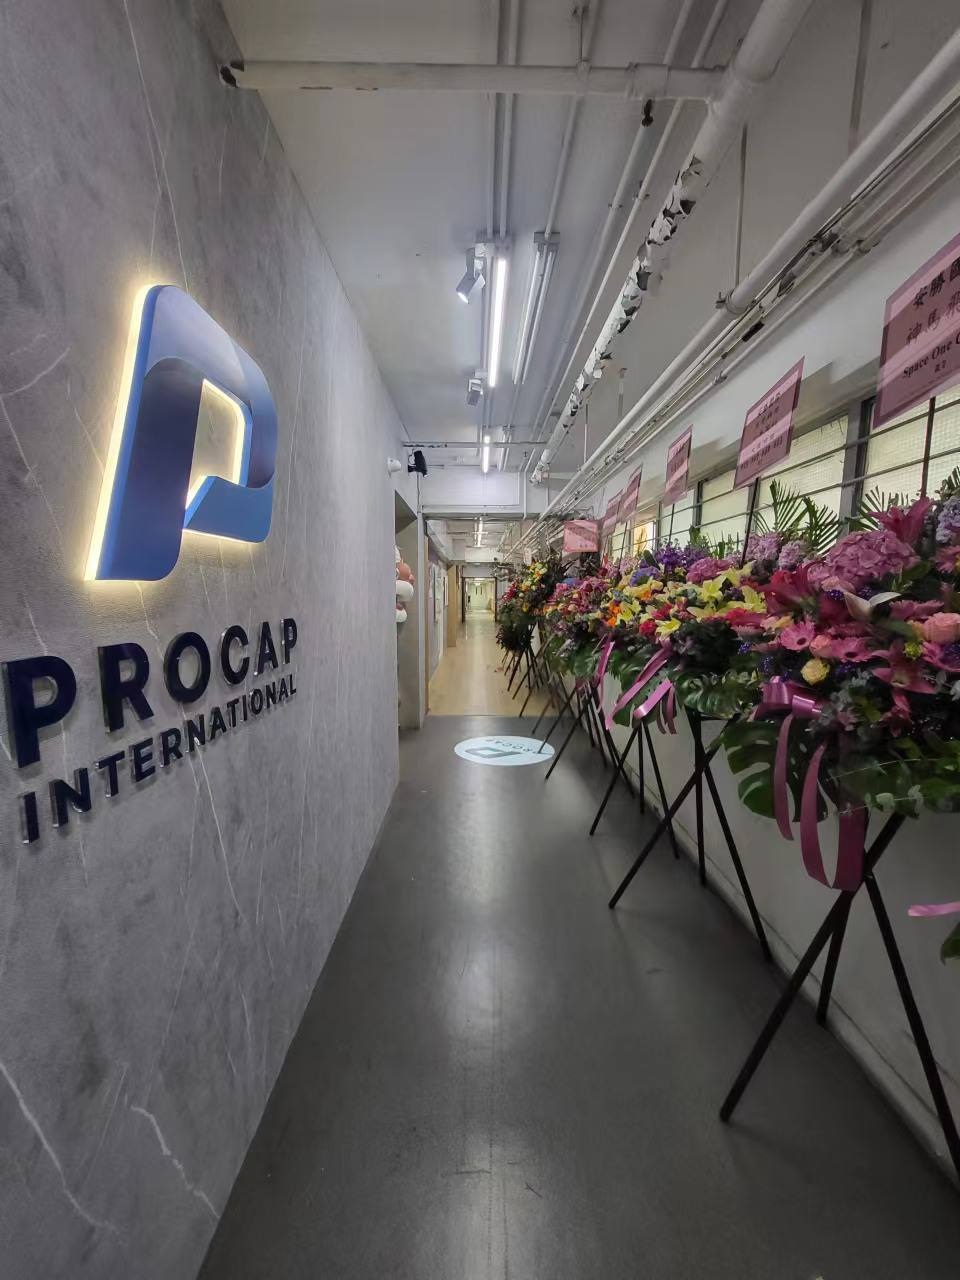 98605098-9fda-4b5d-b859-98939af31e91 Procap International sets in motion its expansion plans with the inauguration of its Hong Kong VIP Lounge